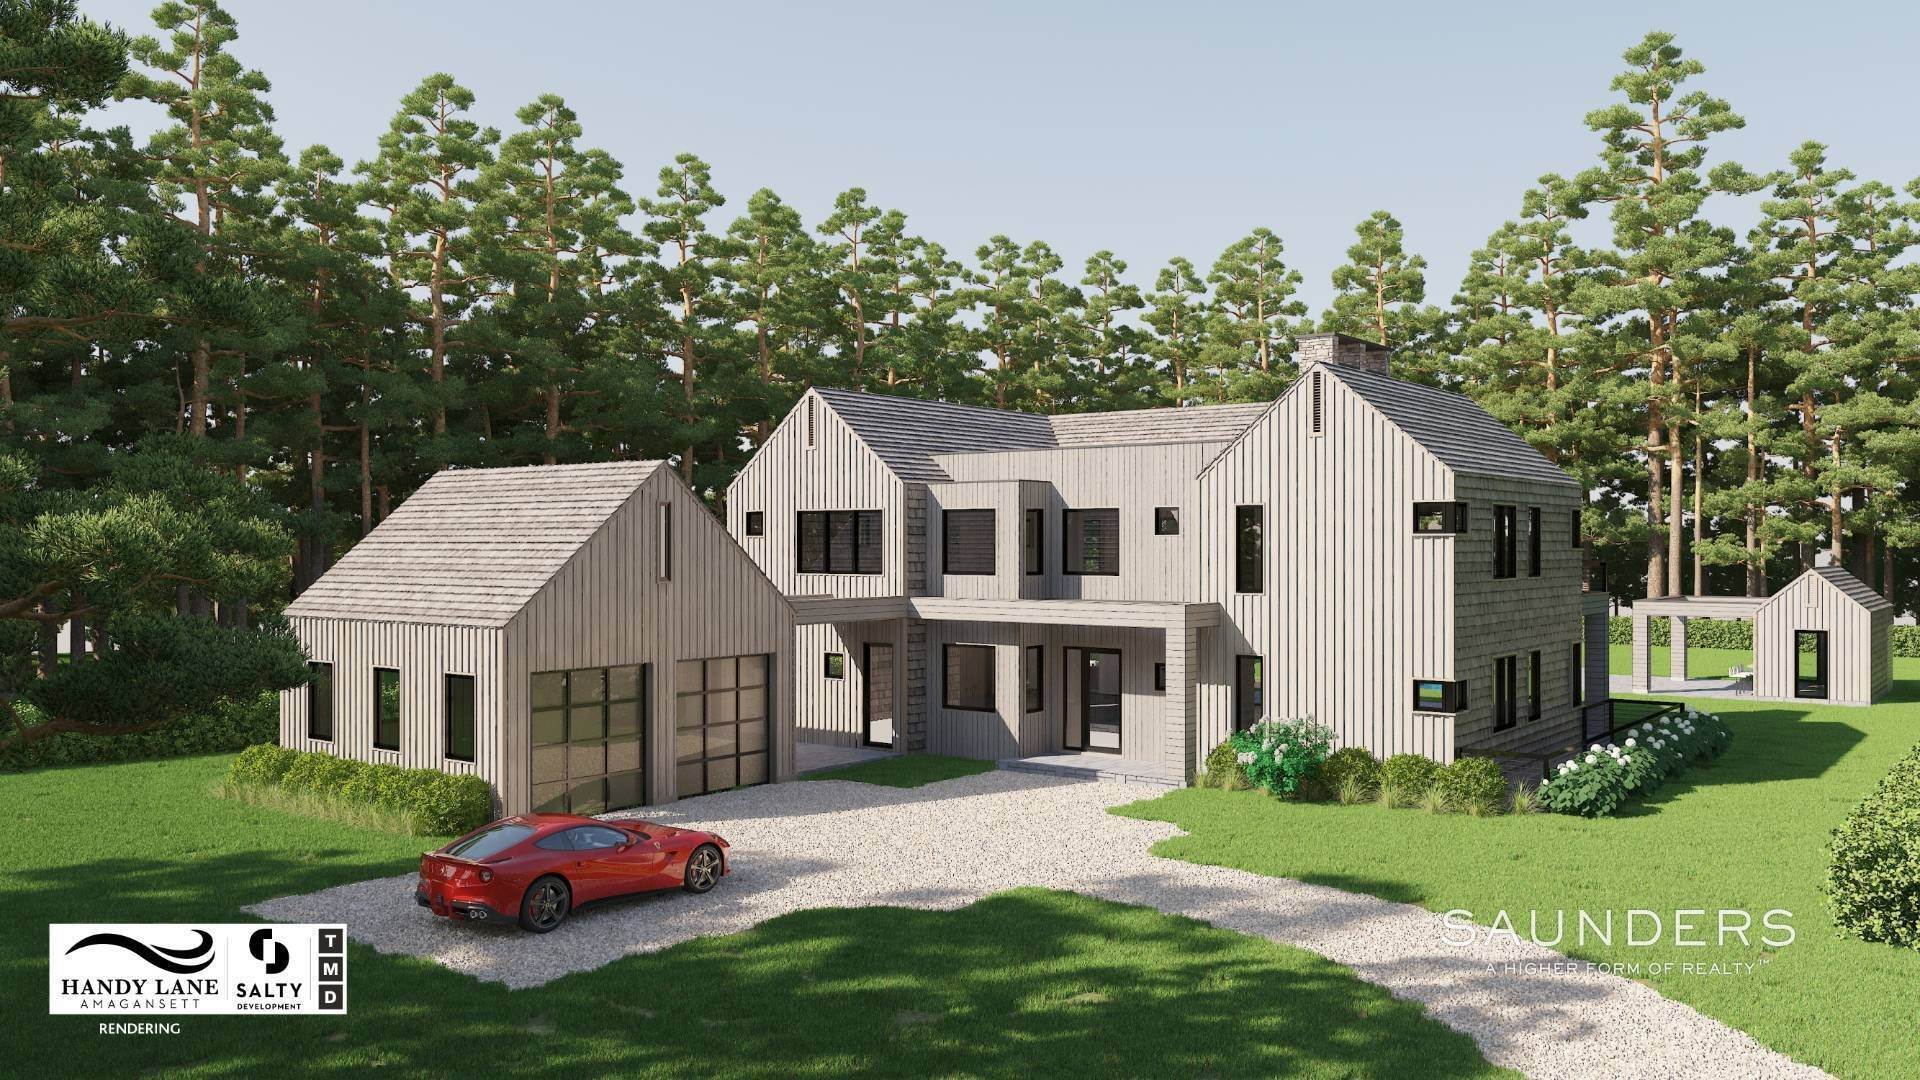 Single Family Homes for Sale at Amagansett South Of The Highway - New Construction 52 Handy Lane, Amagansett, NY 11930